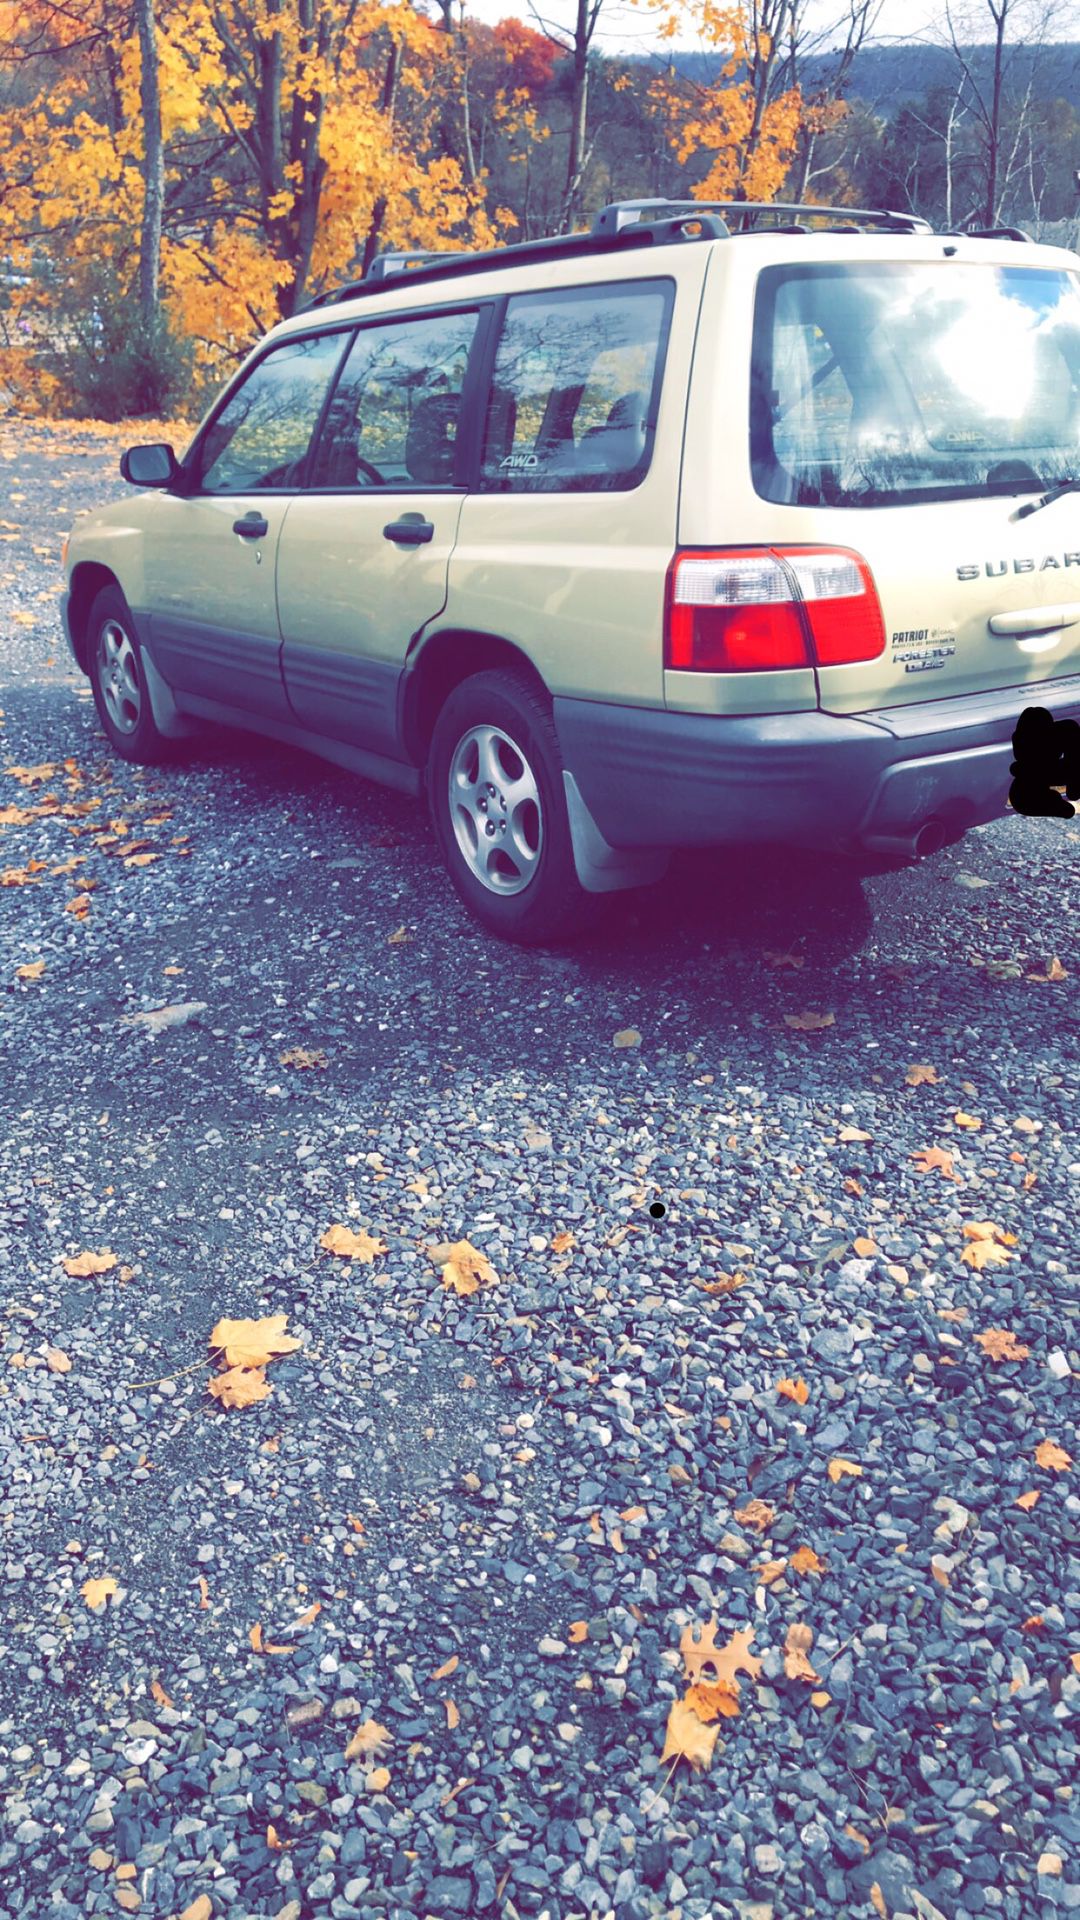 2001 Subaru Forester - Part out 